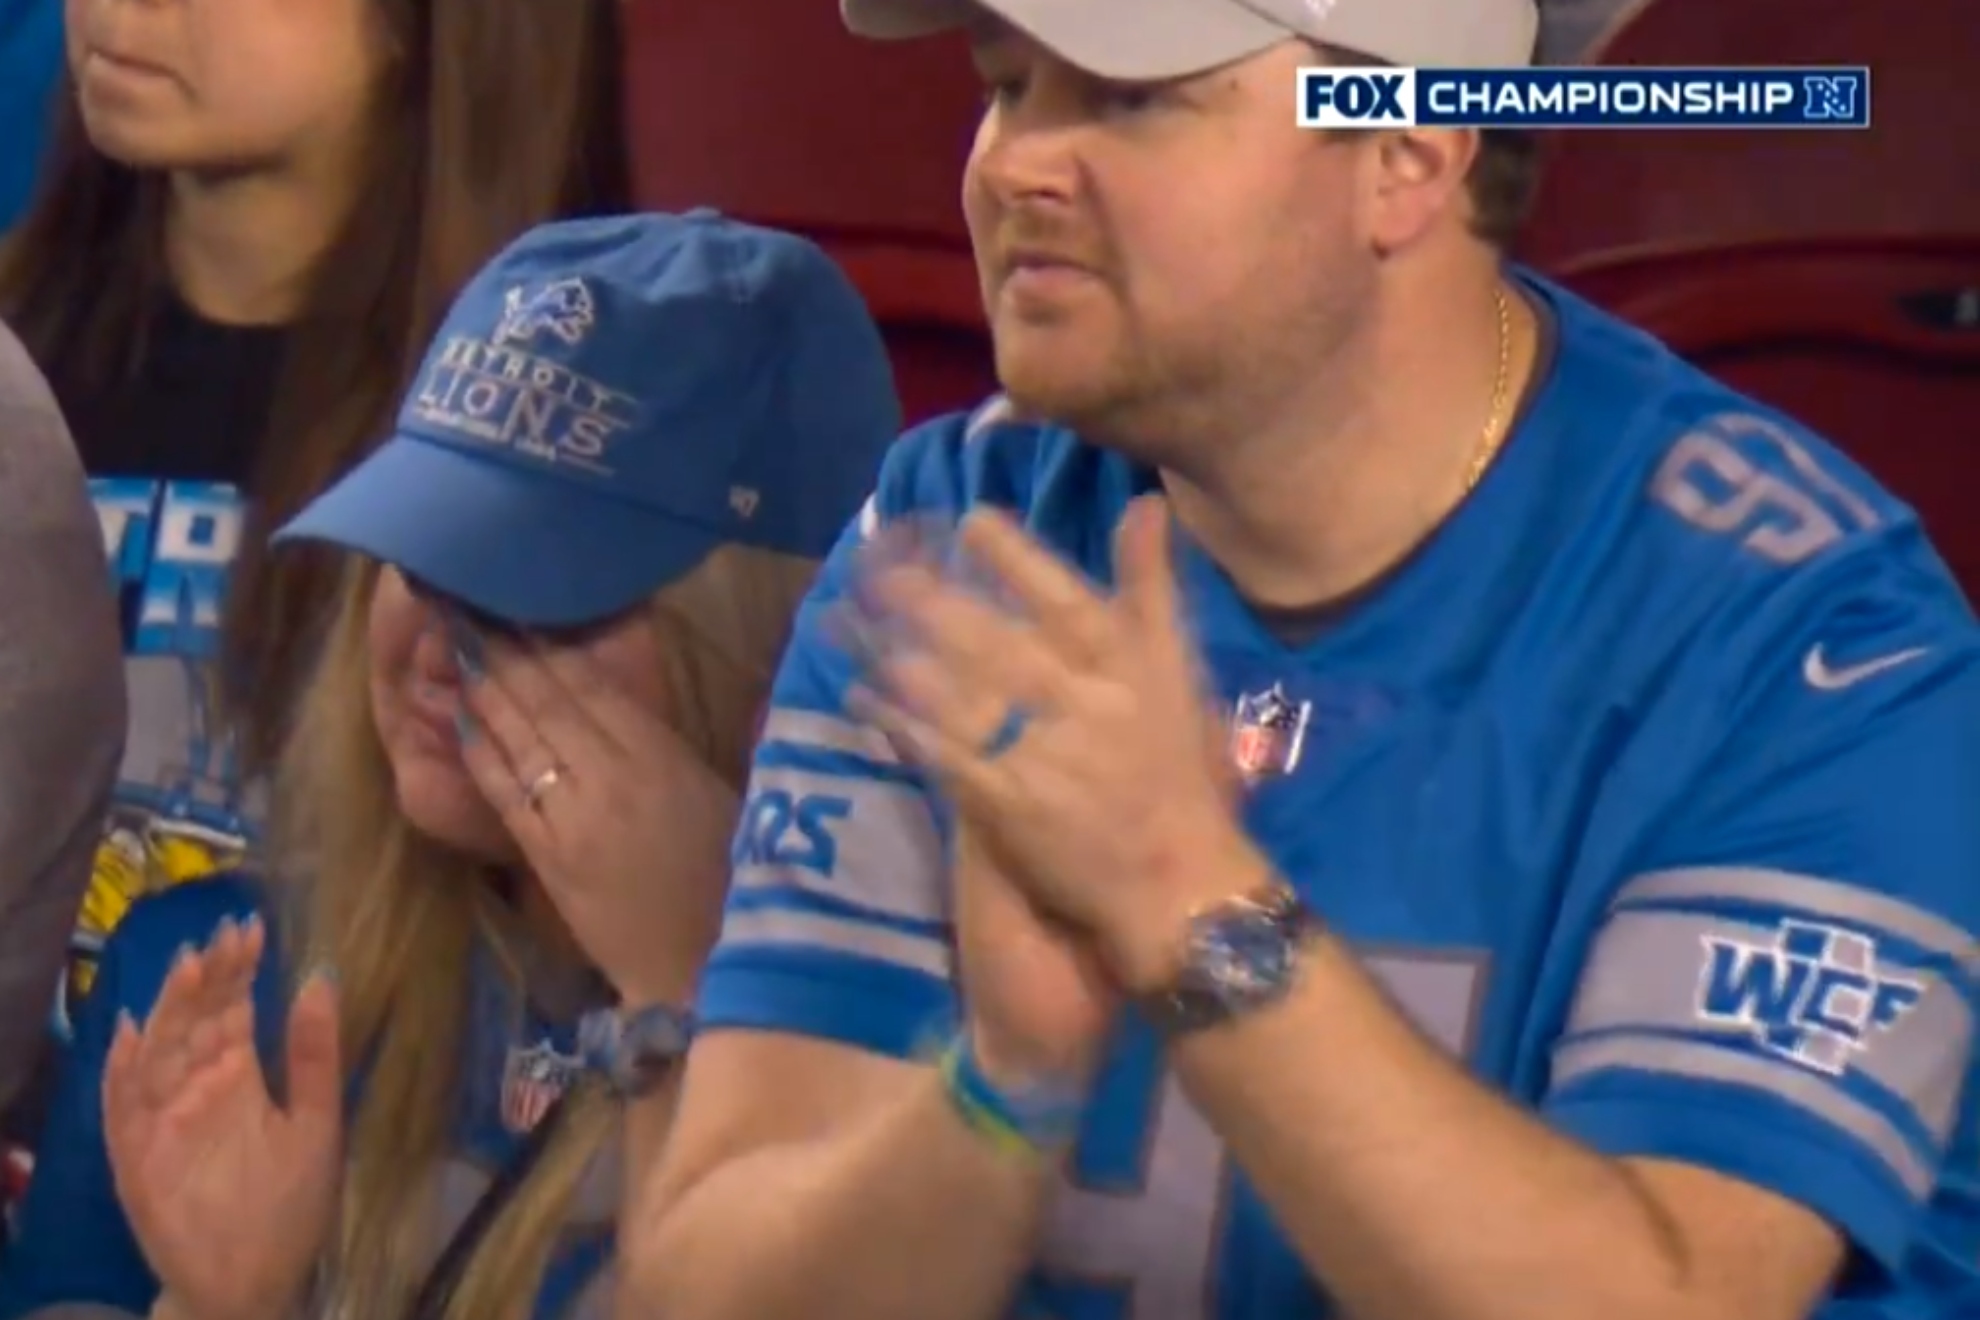 Lions fans brought to tears after the heartbreaking loss of a historic Super Bowl opportunity